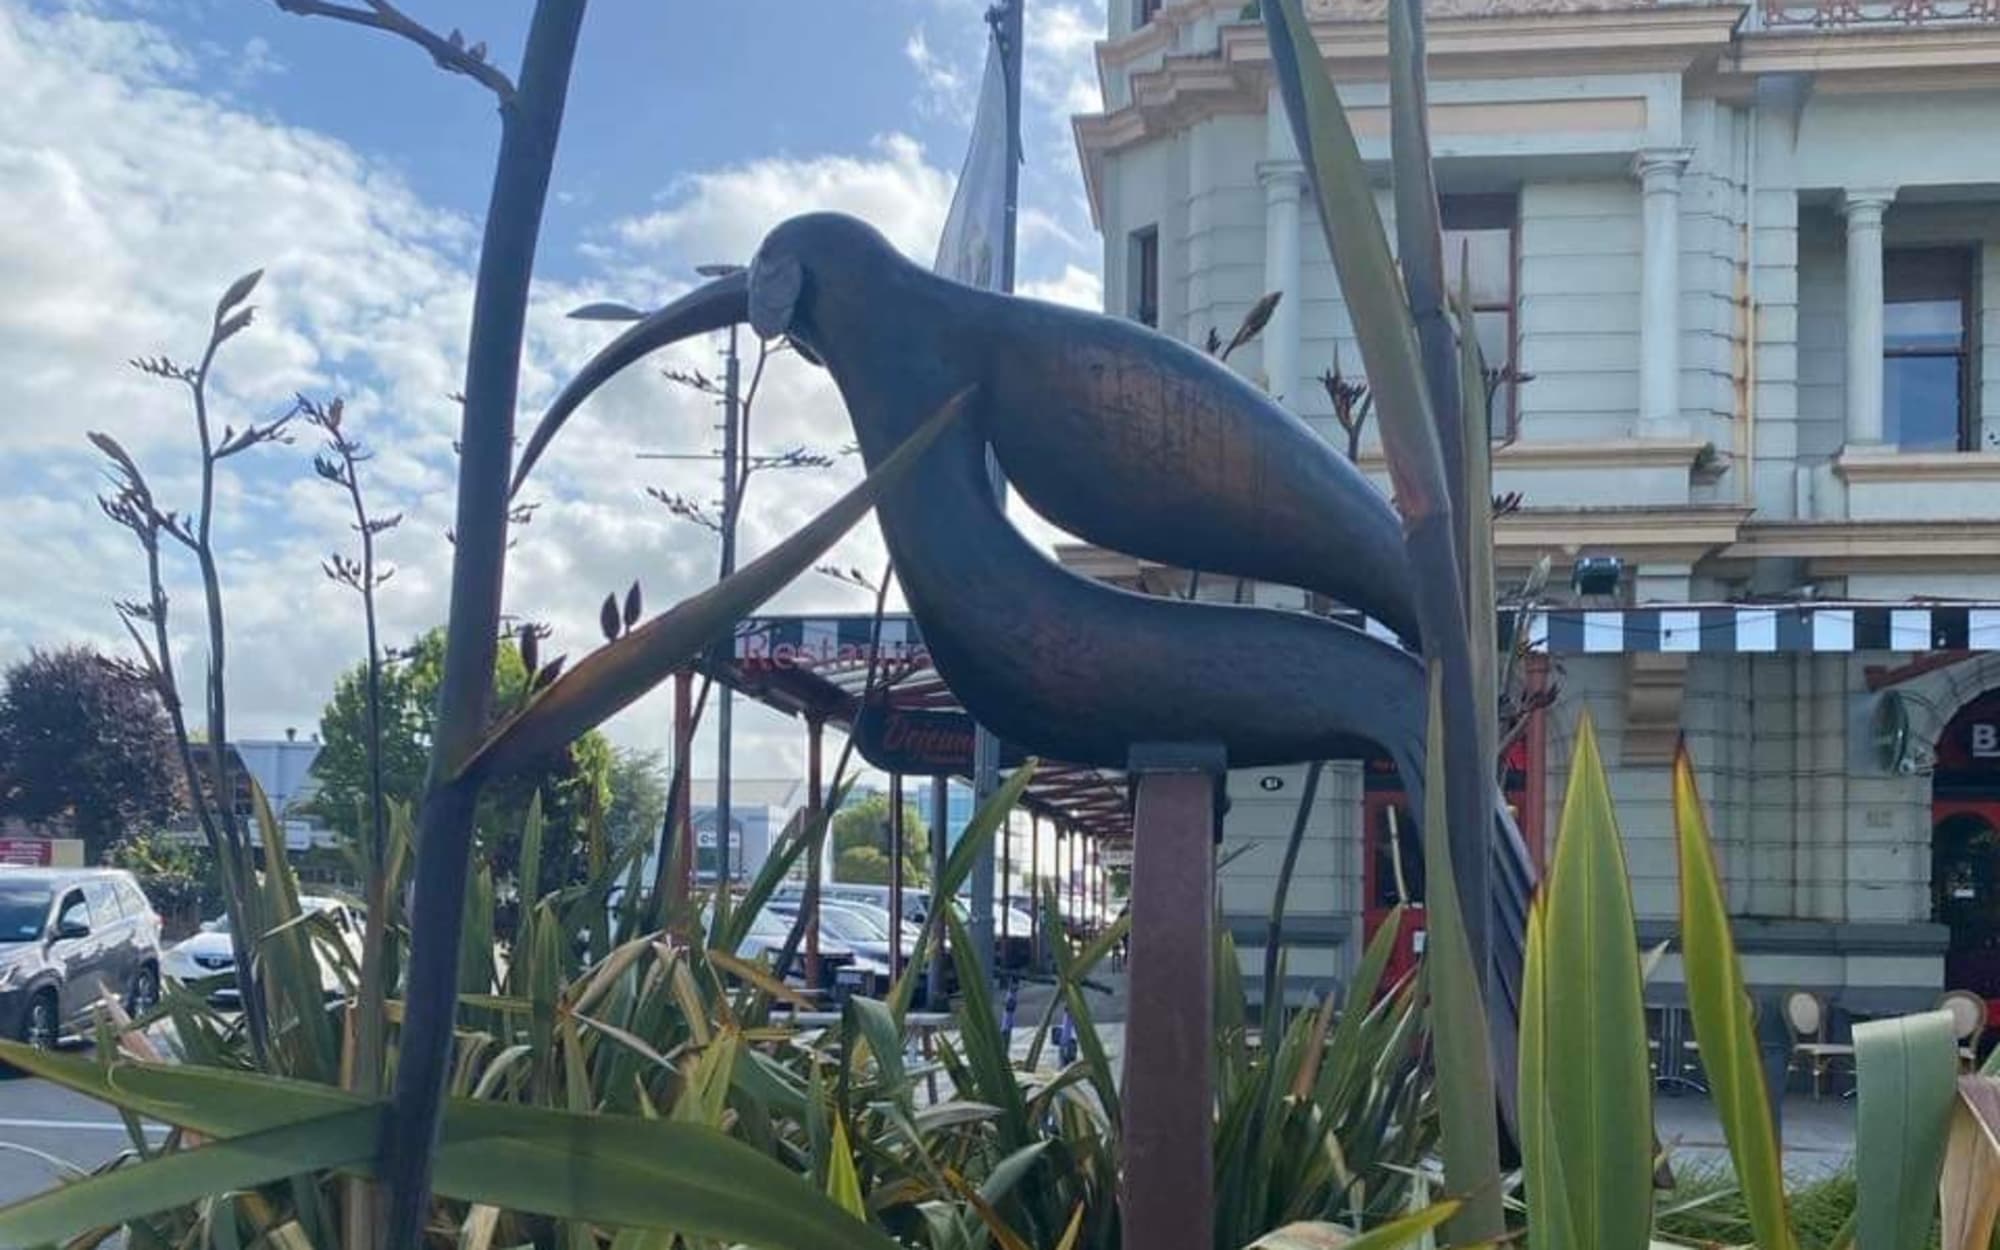 A Paul Dibble sculpture in Palmerston North.